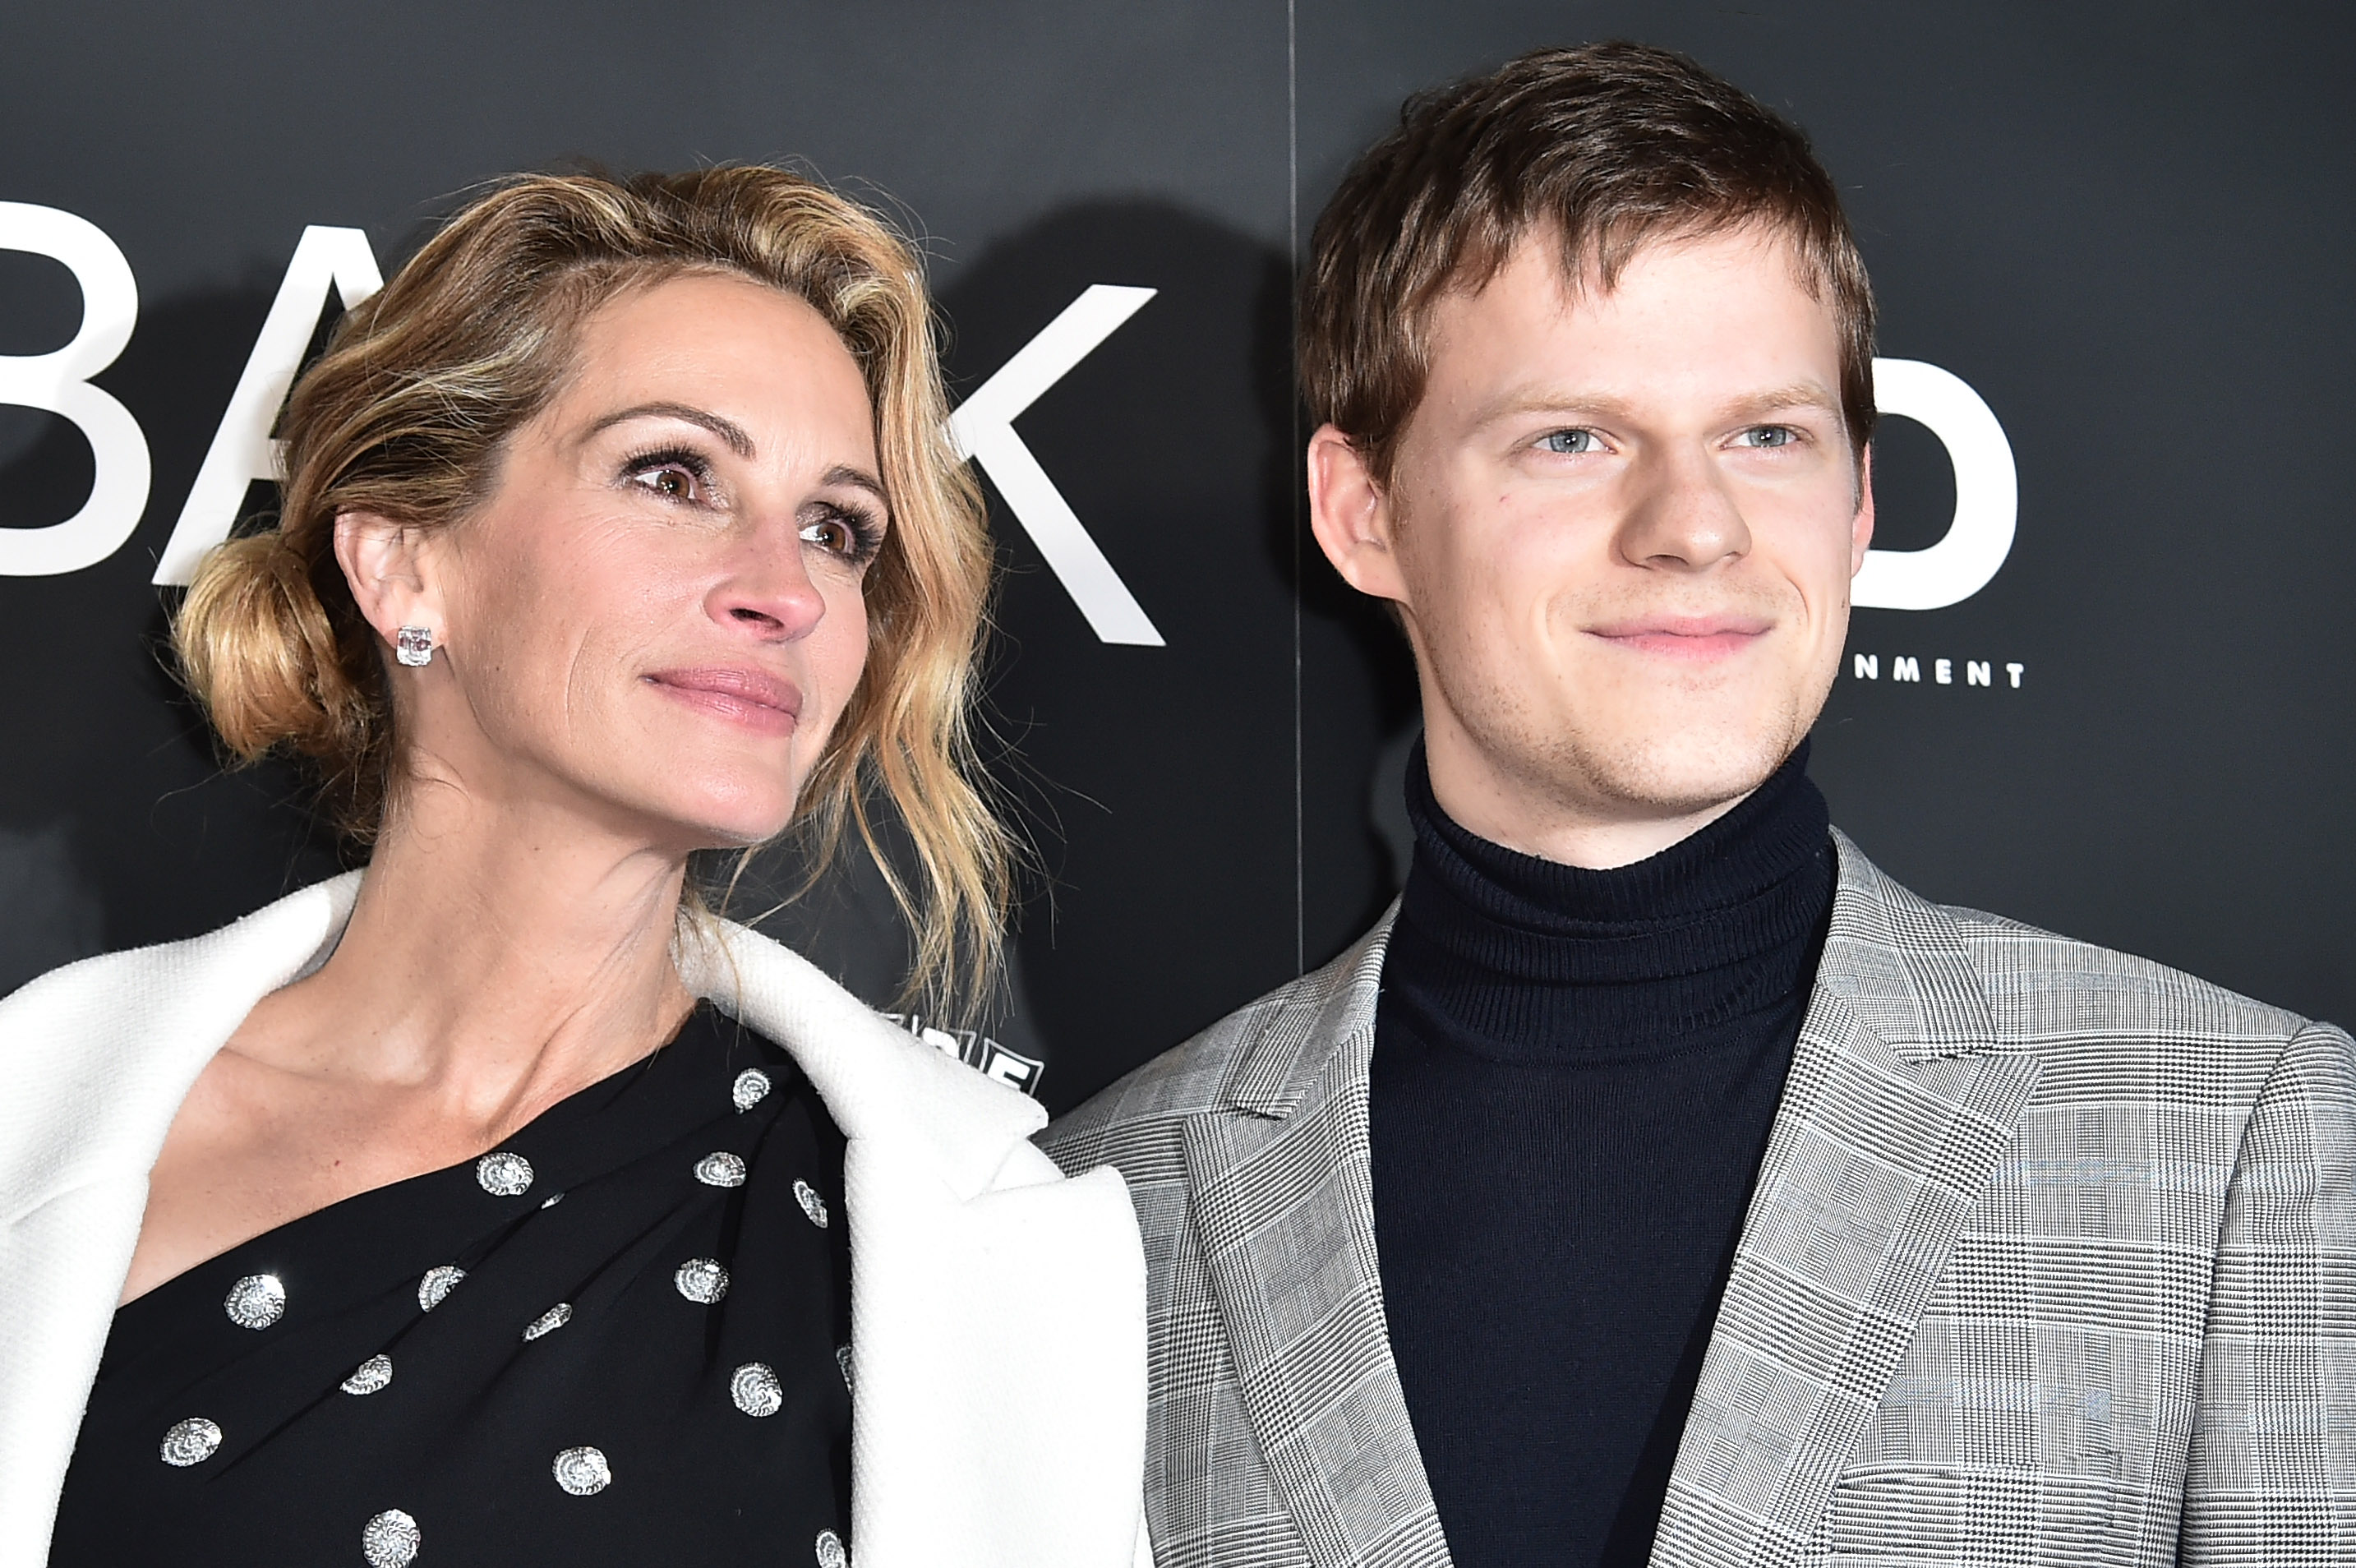 Julia Roberts and Lucas Hedges attend the New York premiere of "Ben Is Back" on December 3, 2018 in New York City | Source: Getty Images